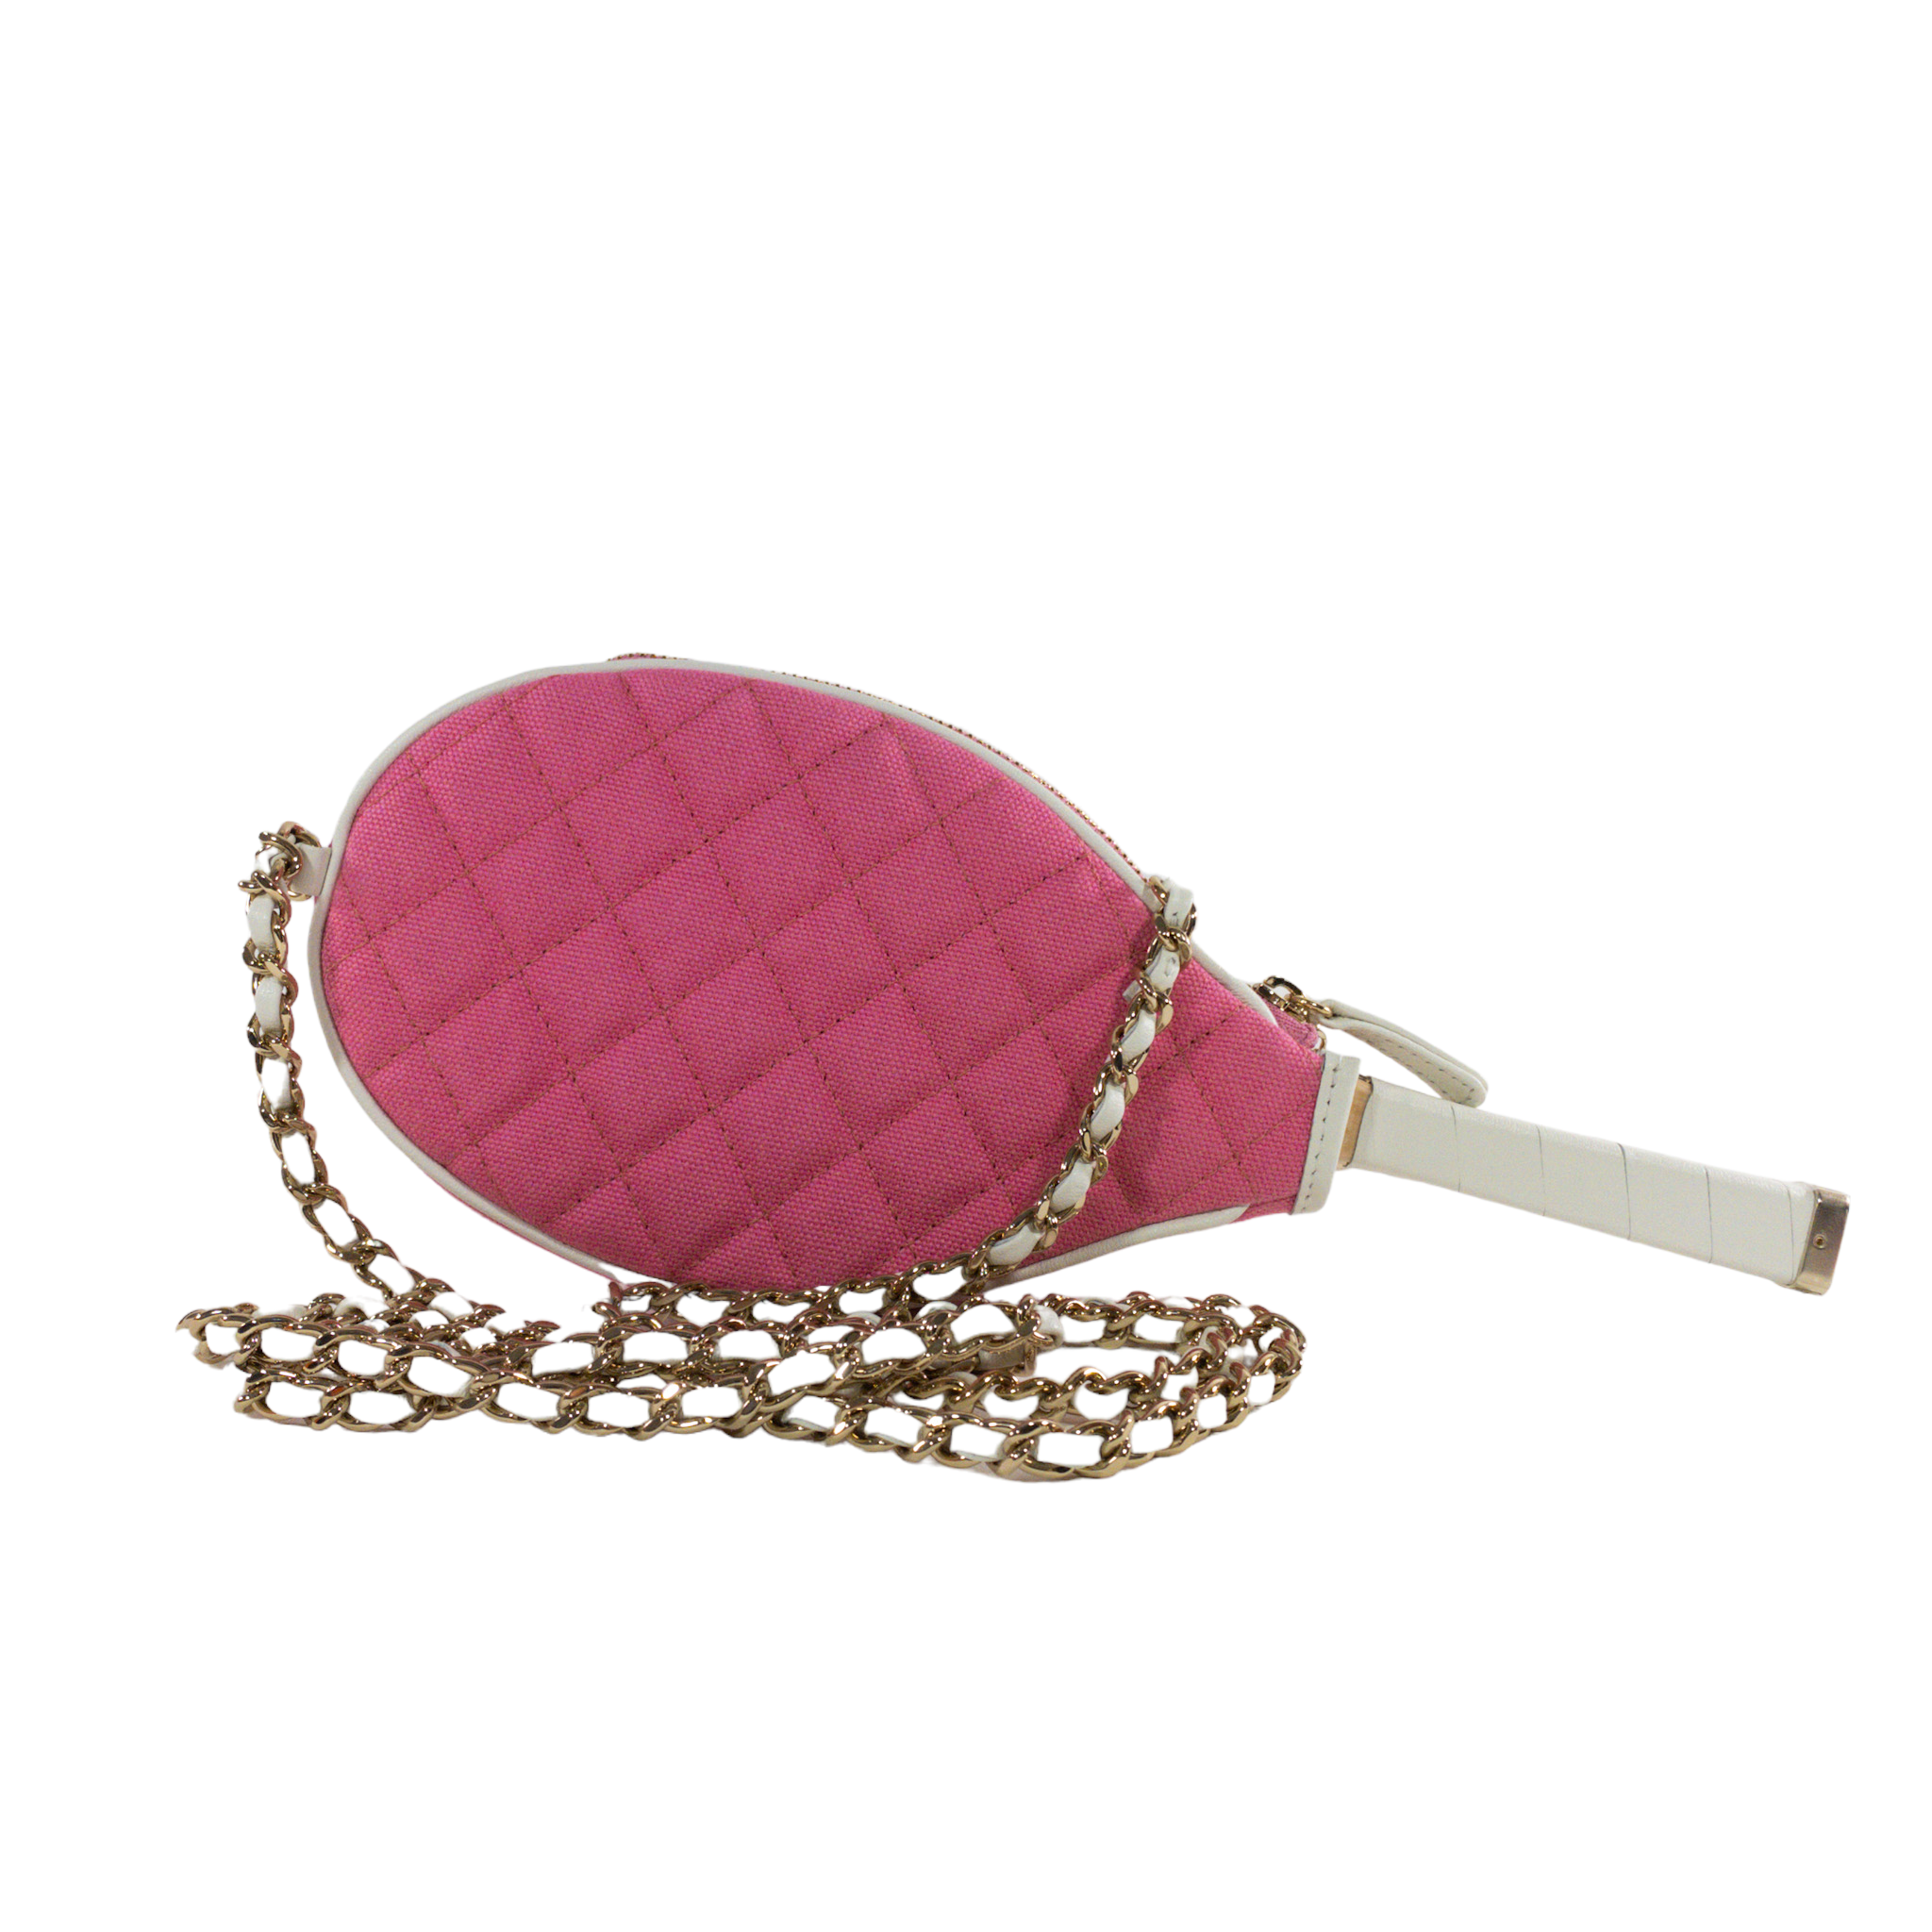 Chanel 23C Pink Quilted Tennis Racket Mirror *Collector's Piece